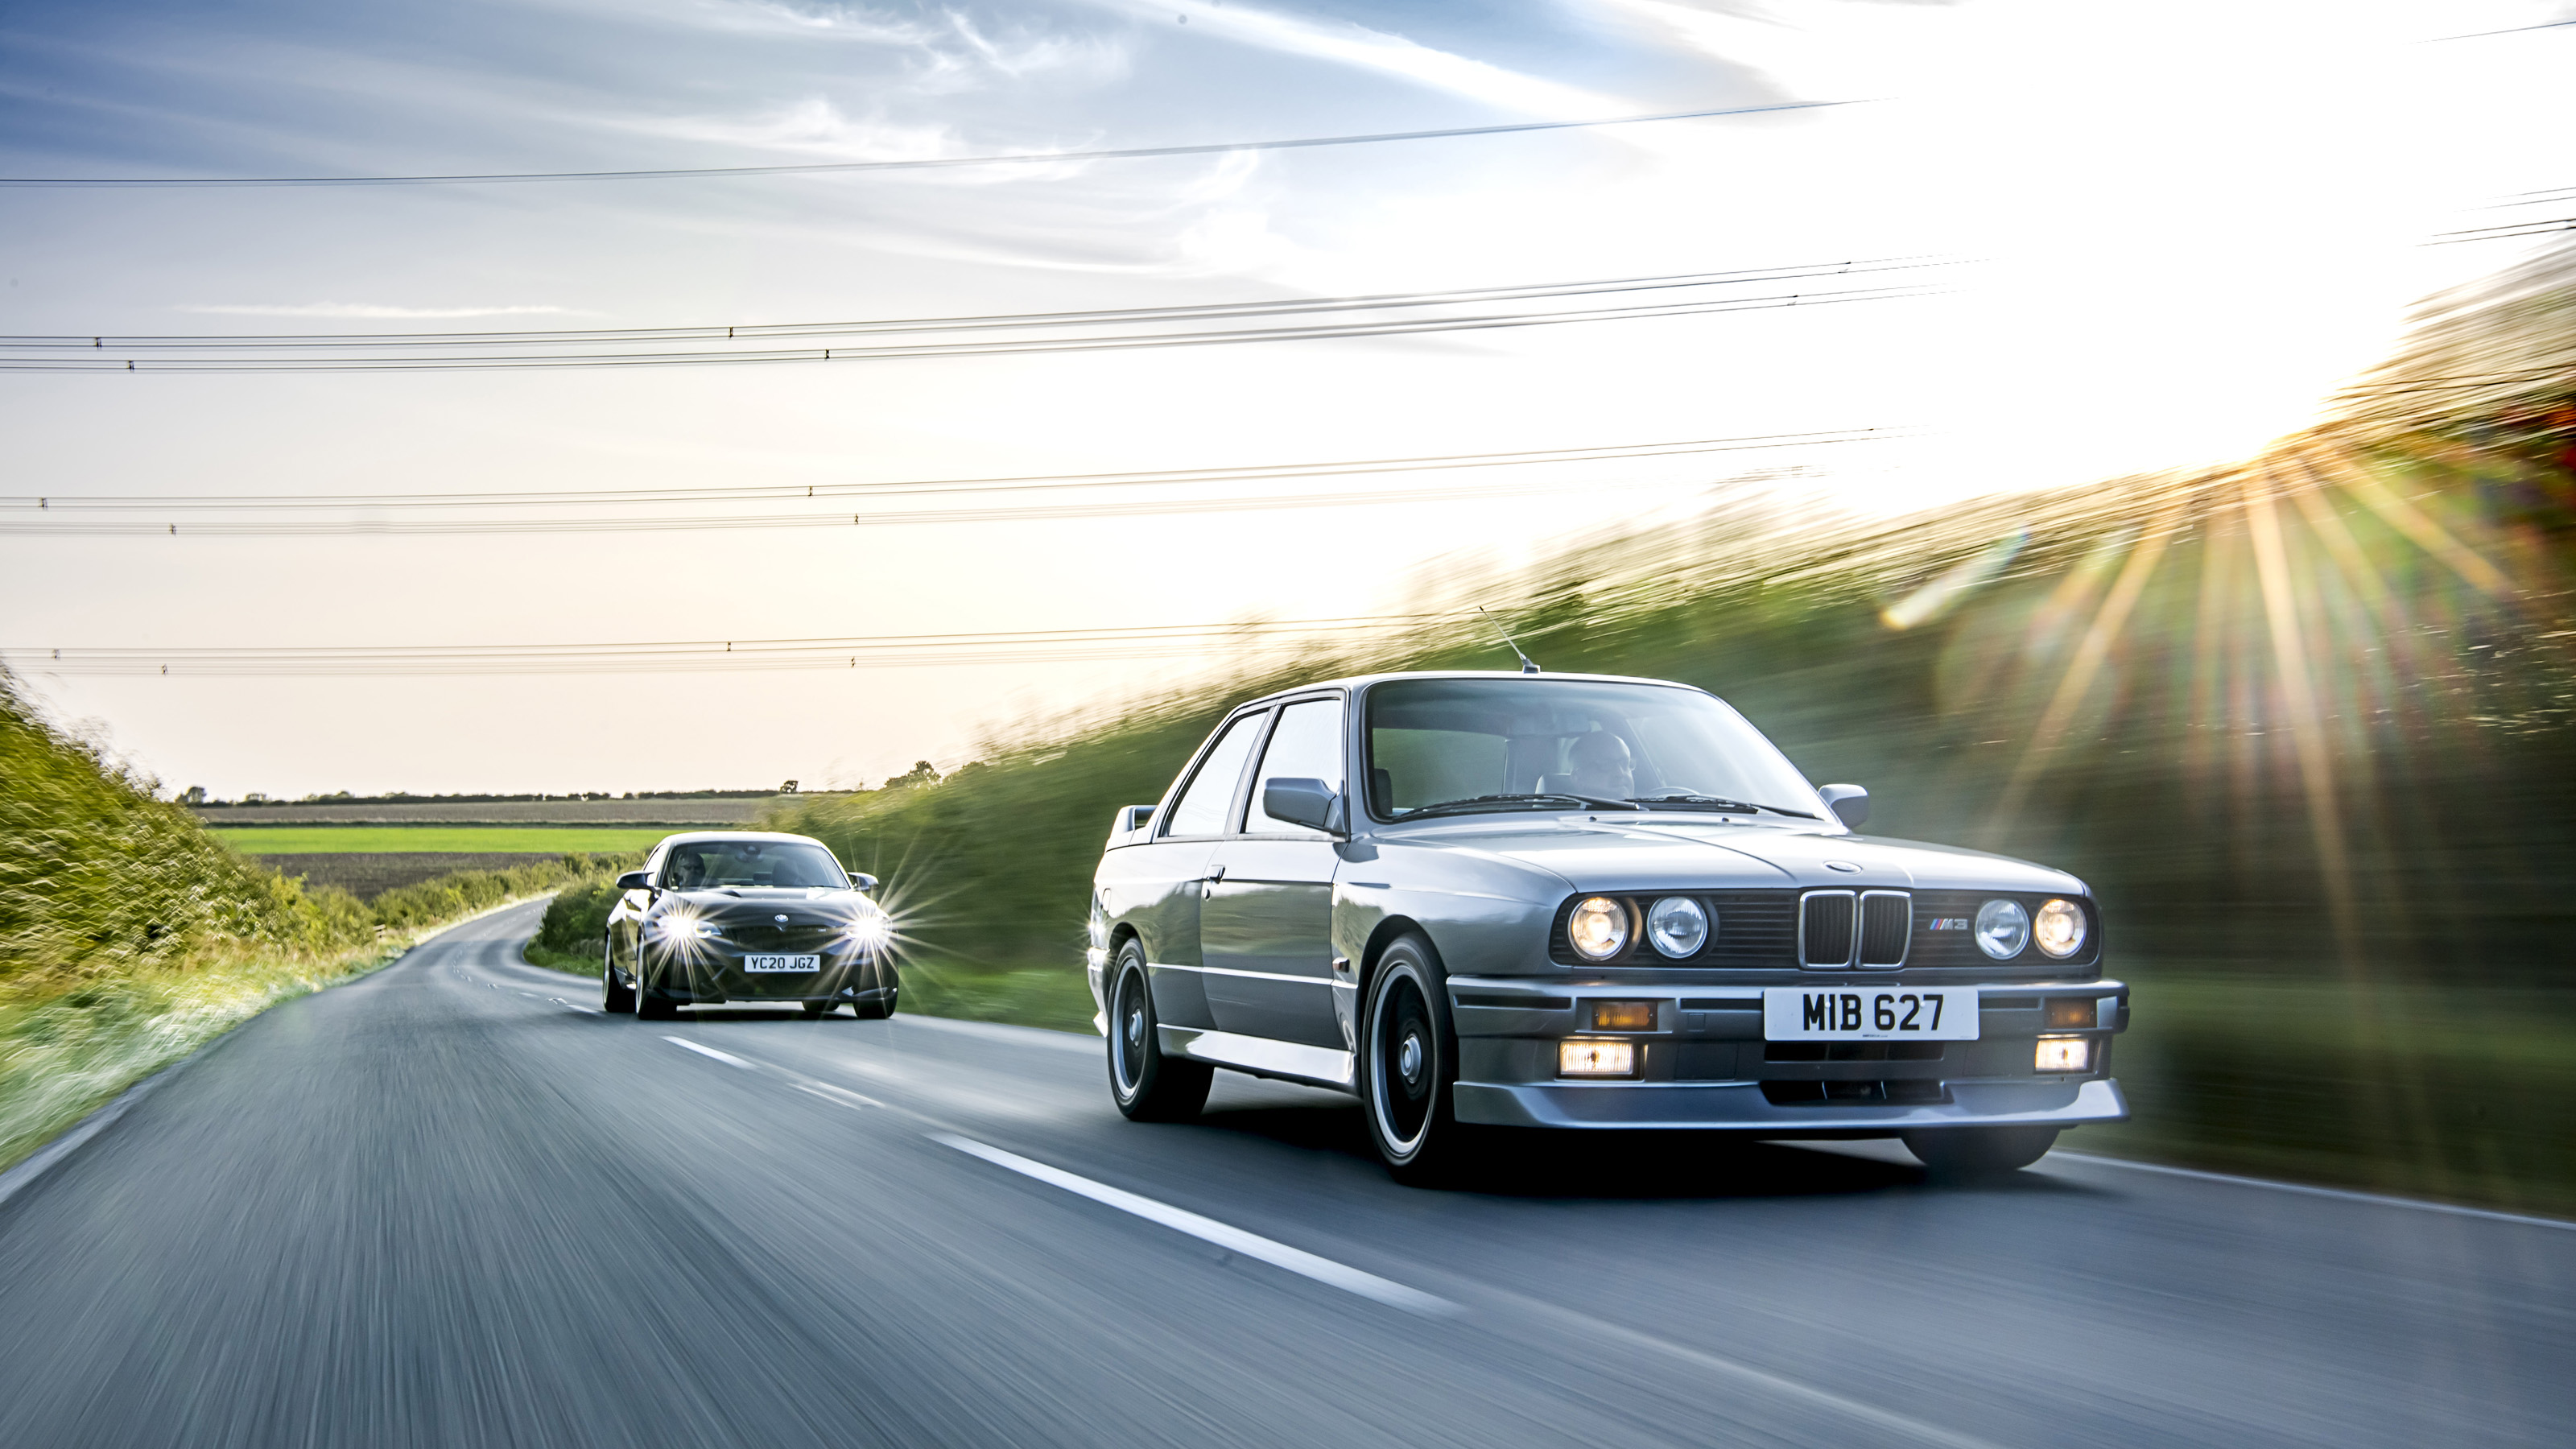 Win a BMW M poster book